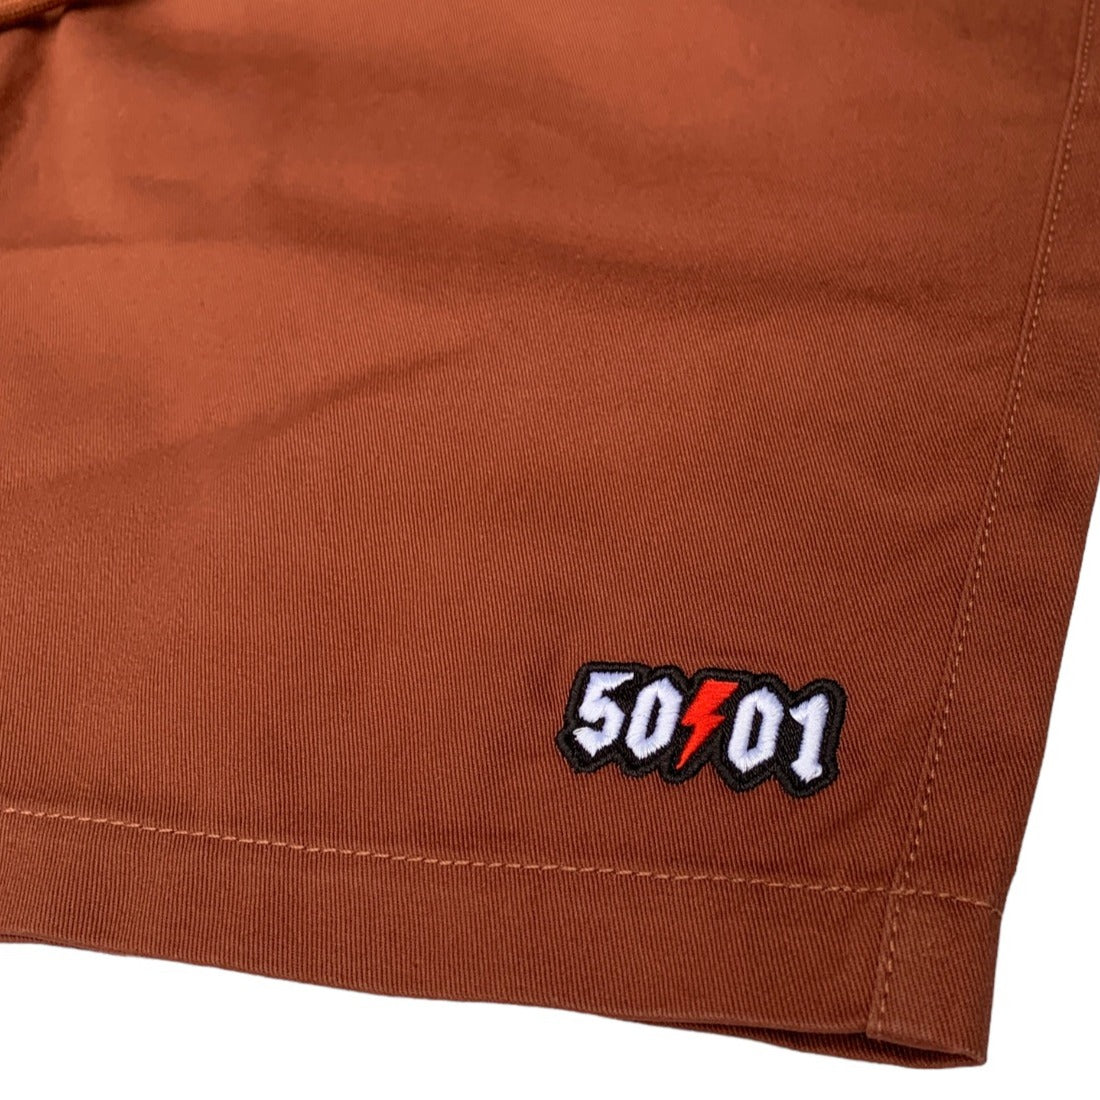 50to01 - CLASSIC TAB SHORTS CLAY